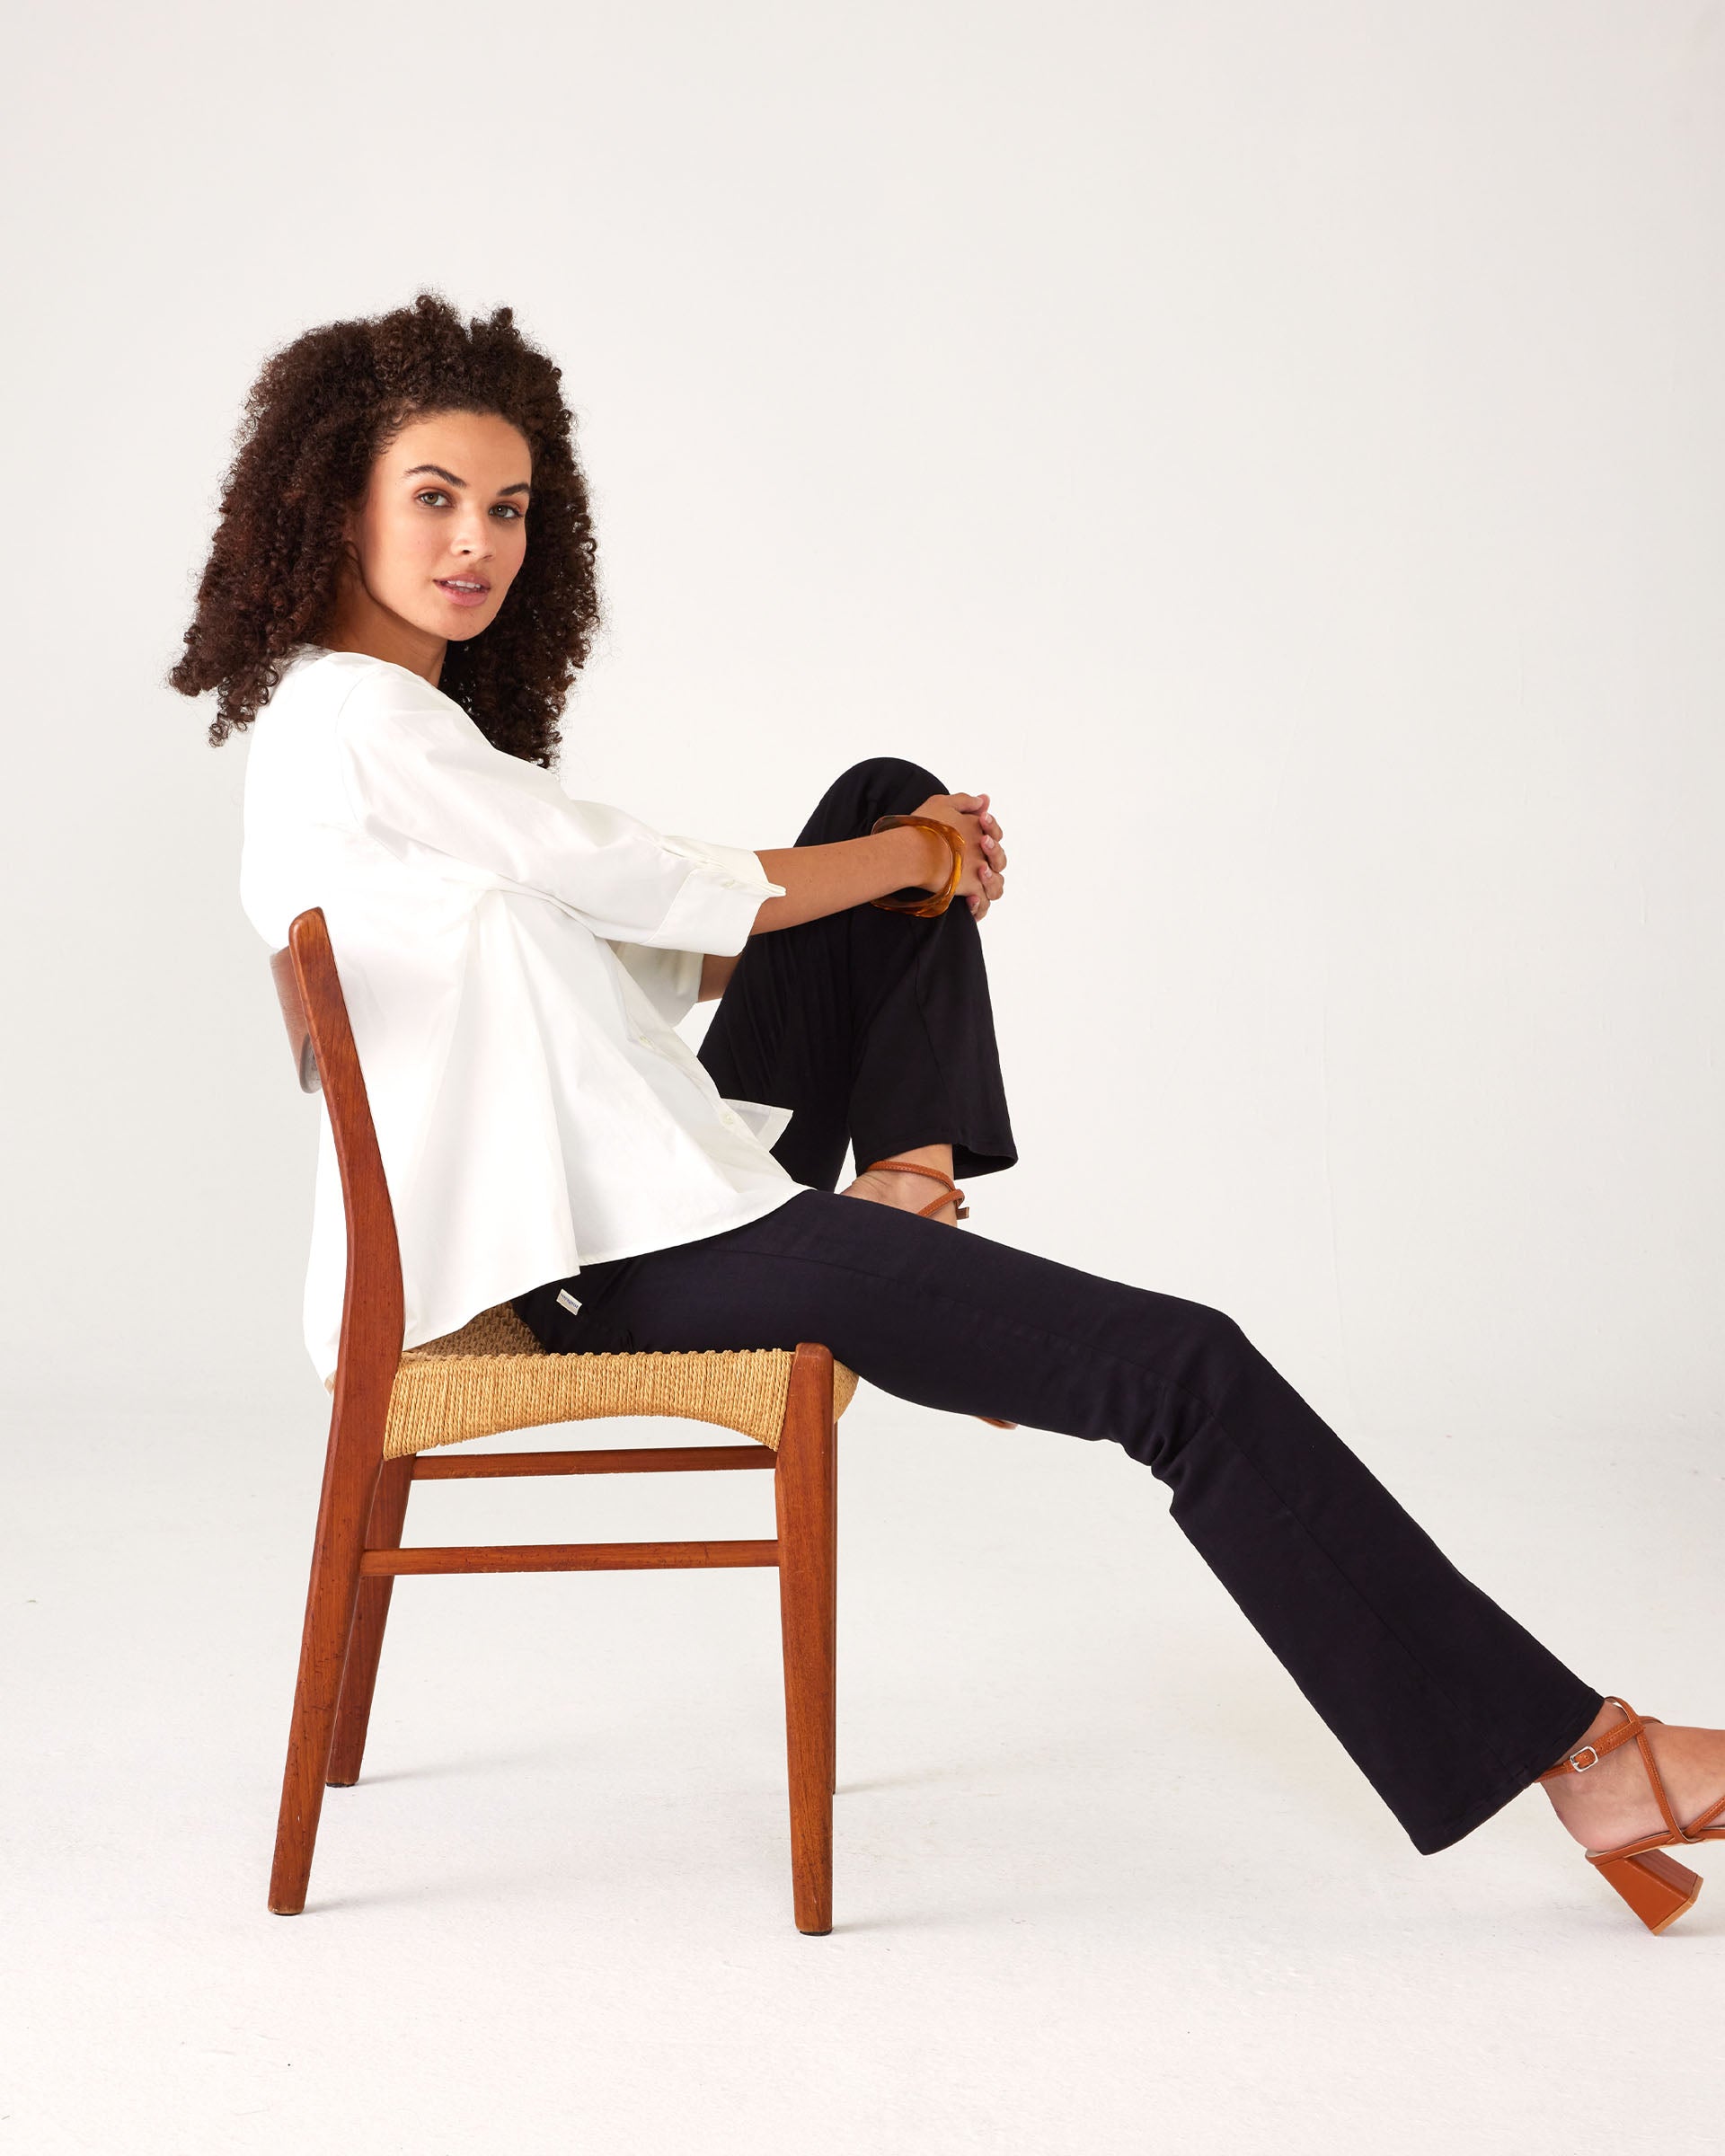 Woman showcasing Mersea Nomad black denim full length boot-cut jeans sitting in a chair against a white background